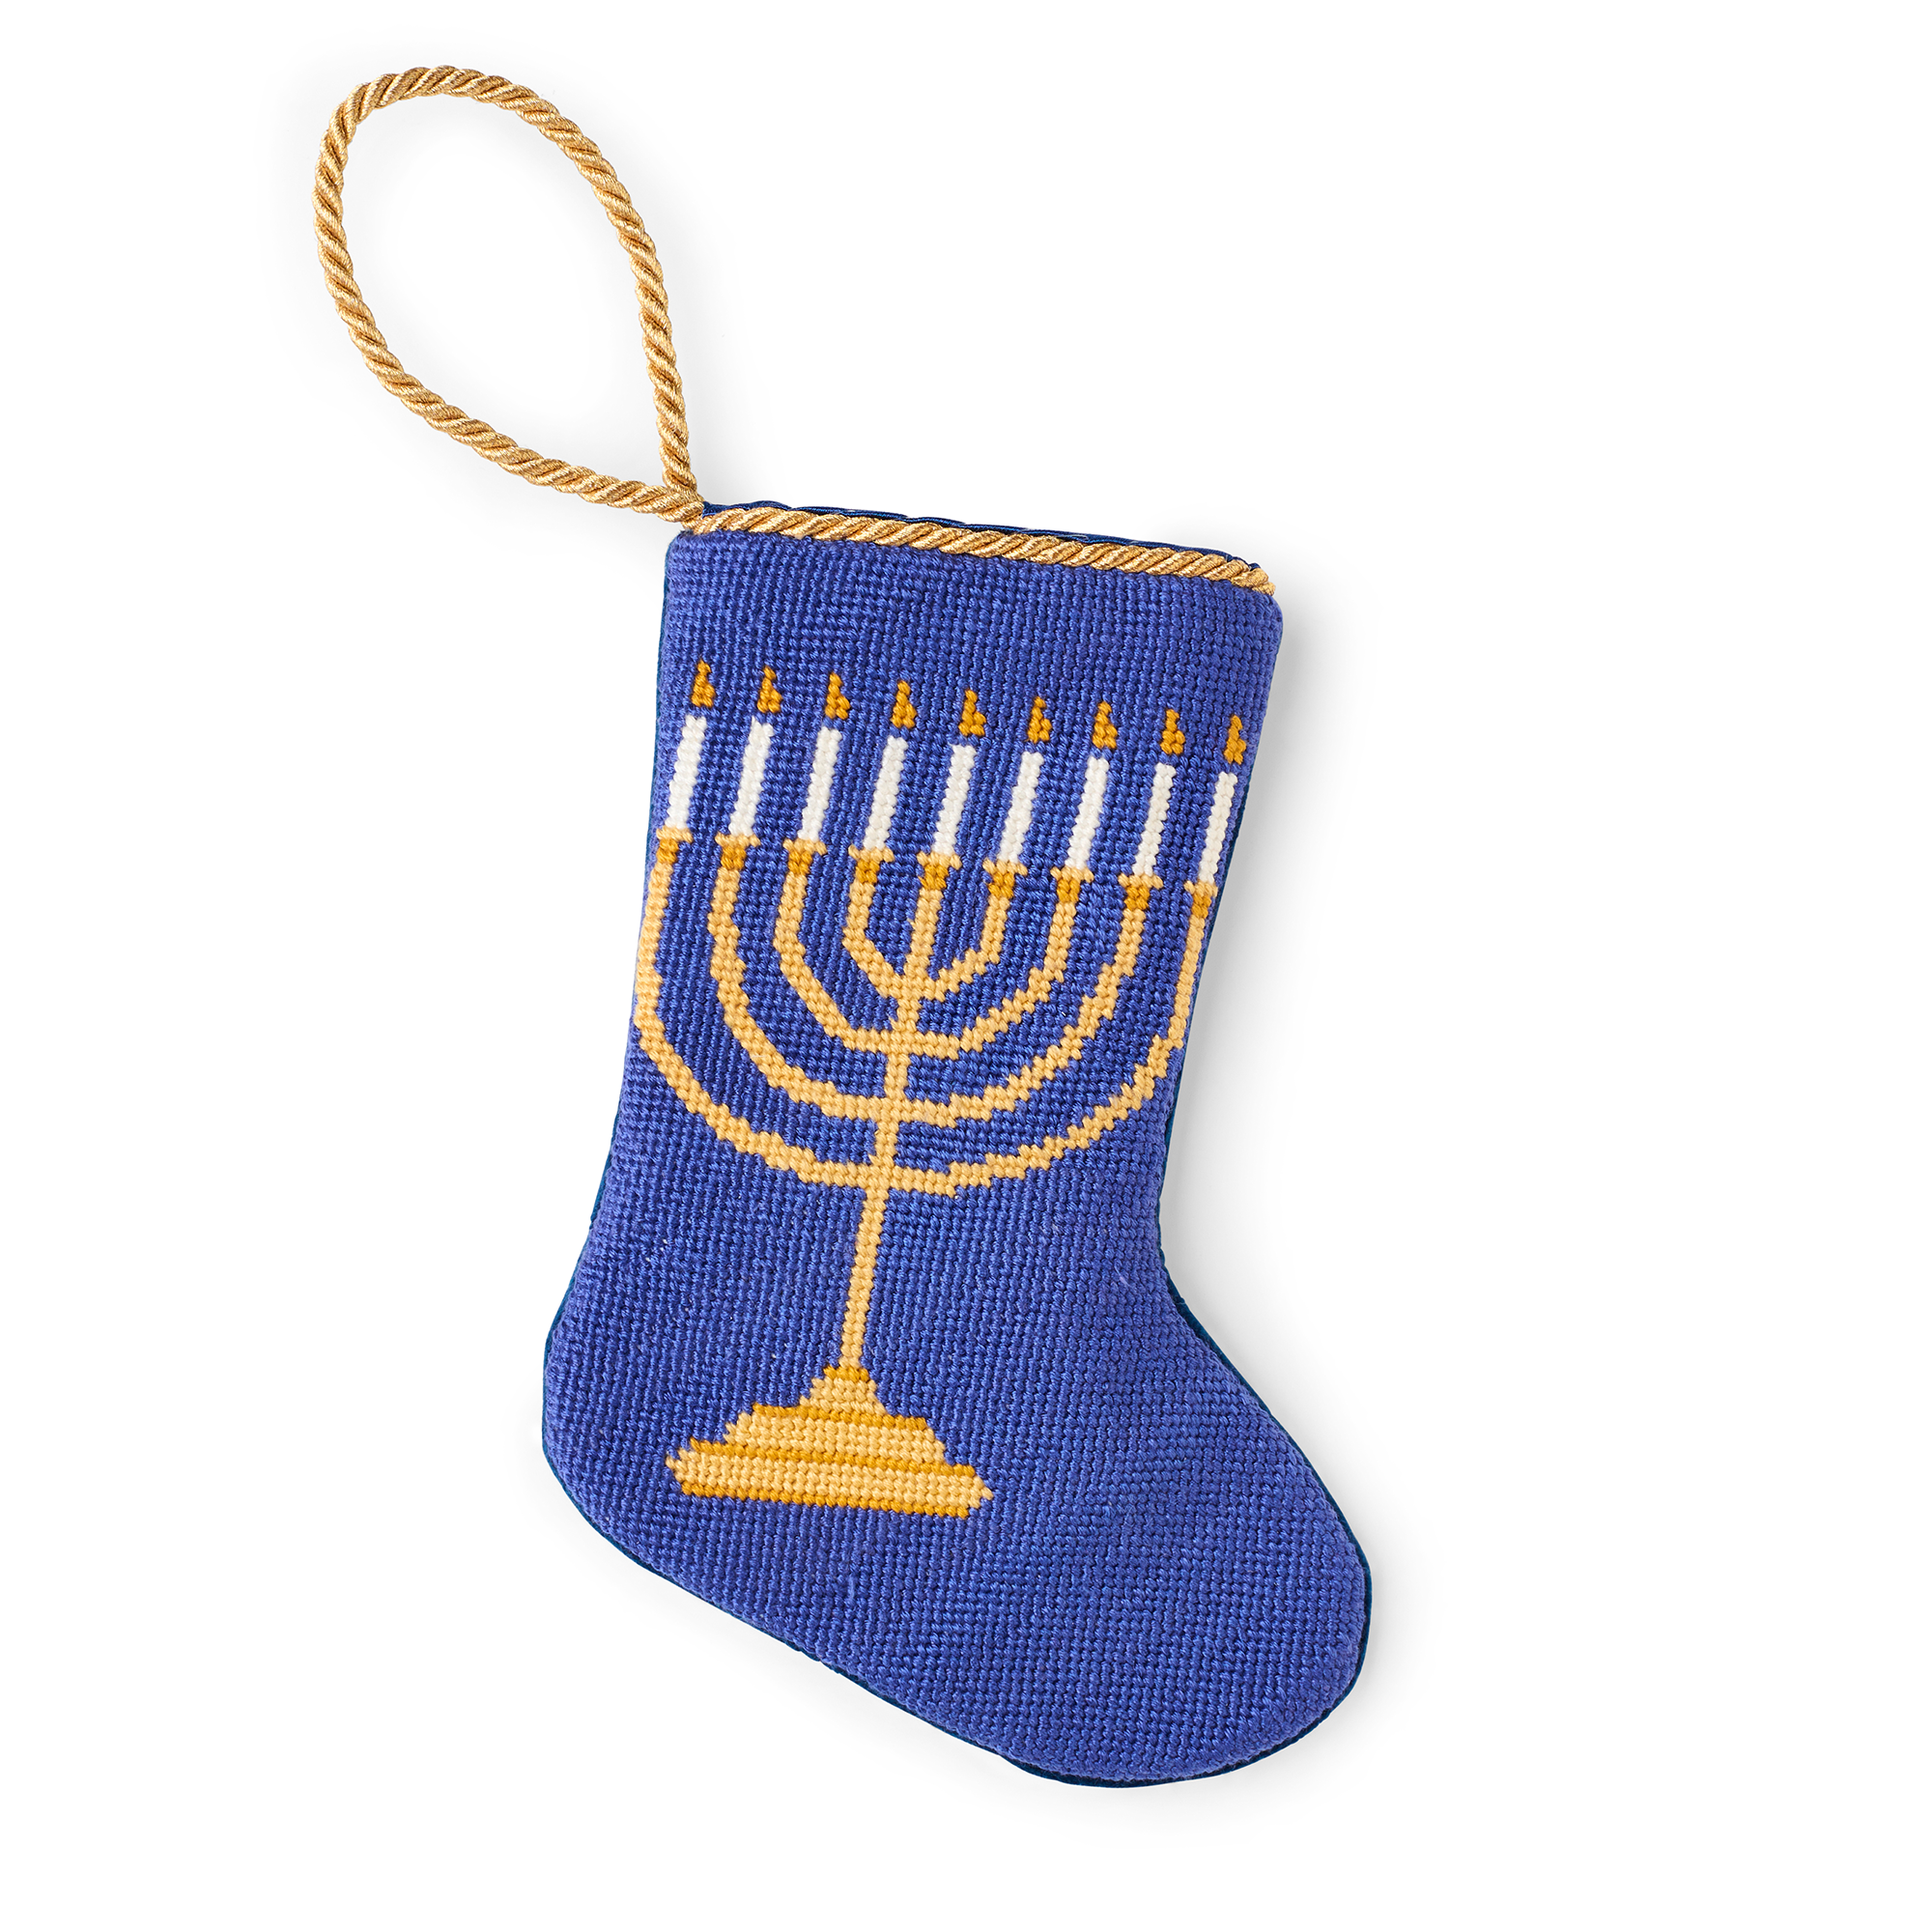 A small, intricately designed needlepoint stocking featuring a festive menorah with lit candles. A gold loop at the top makes it perfect as a tree ornament, place setting, or for hanging by the fireplace.